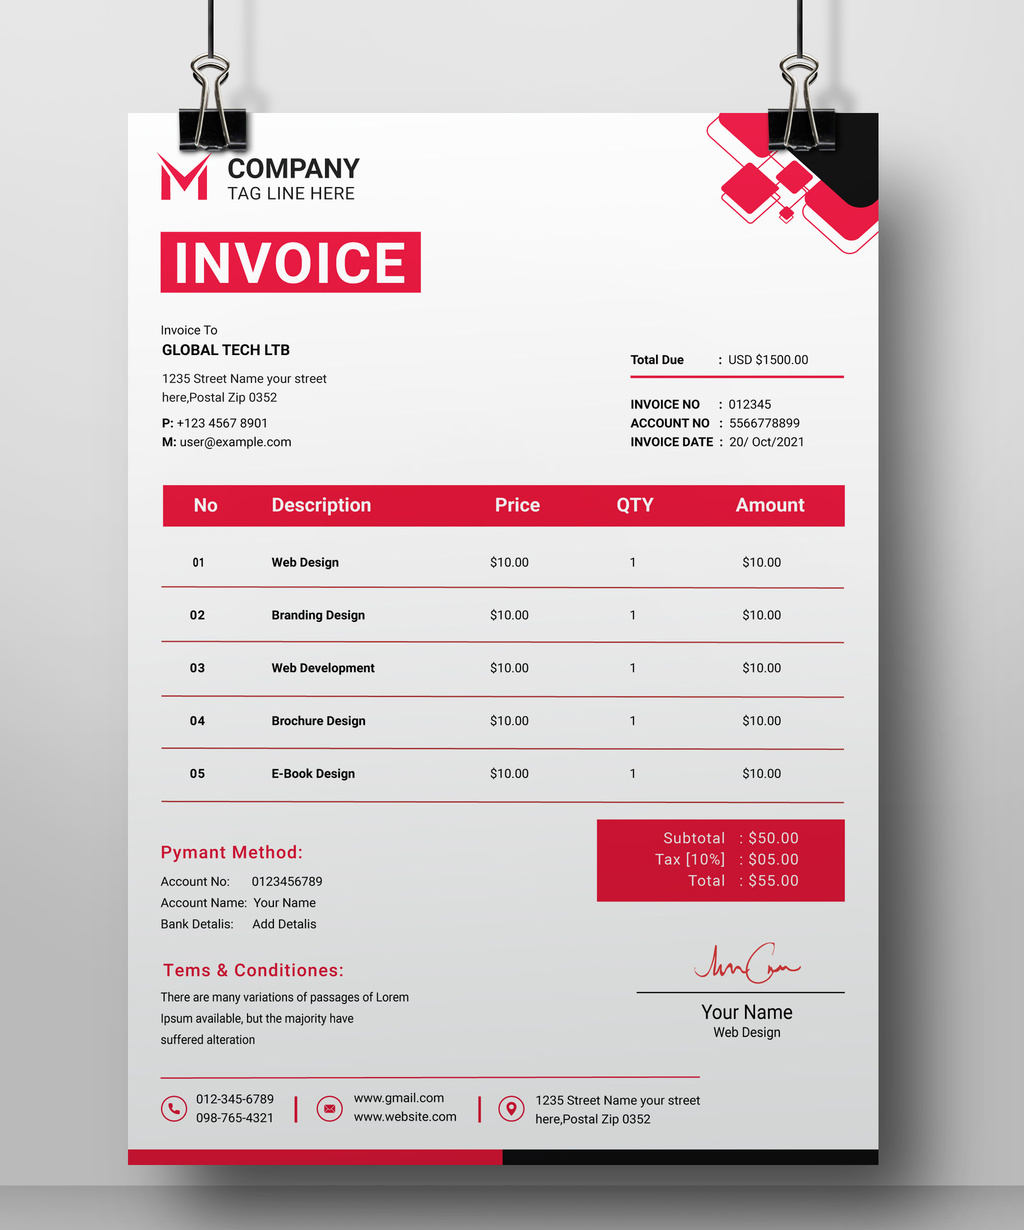 Invoice Layout (AI Format)